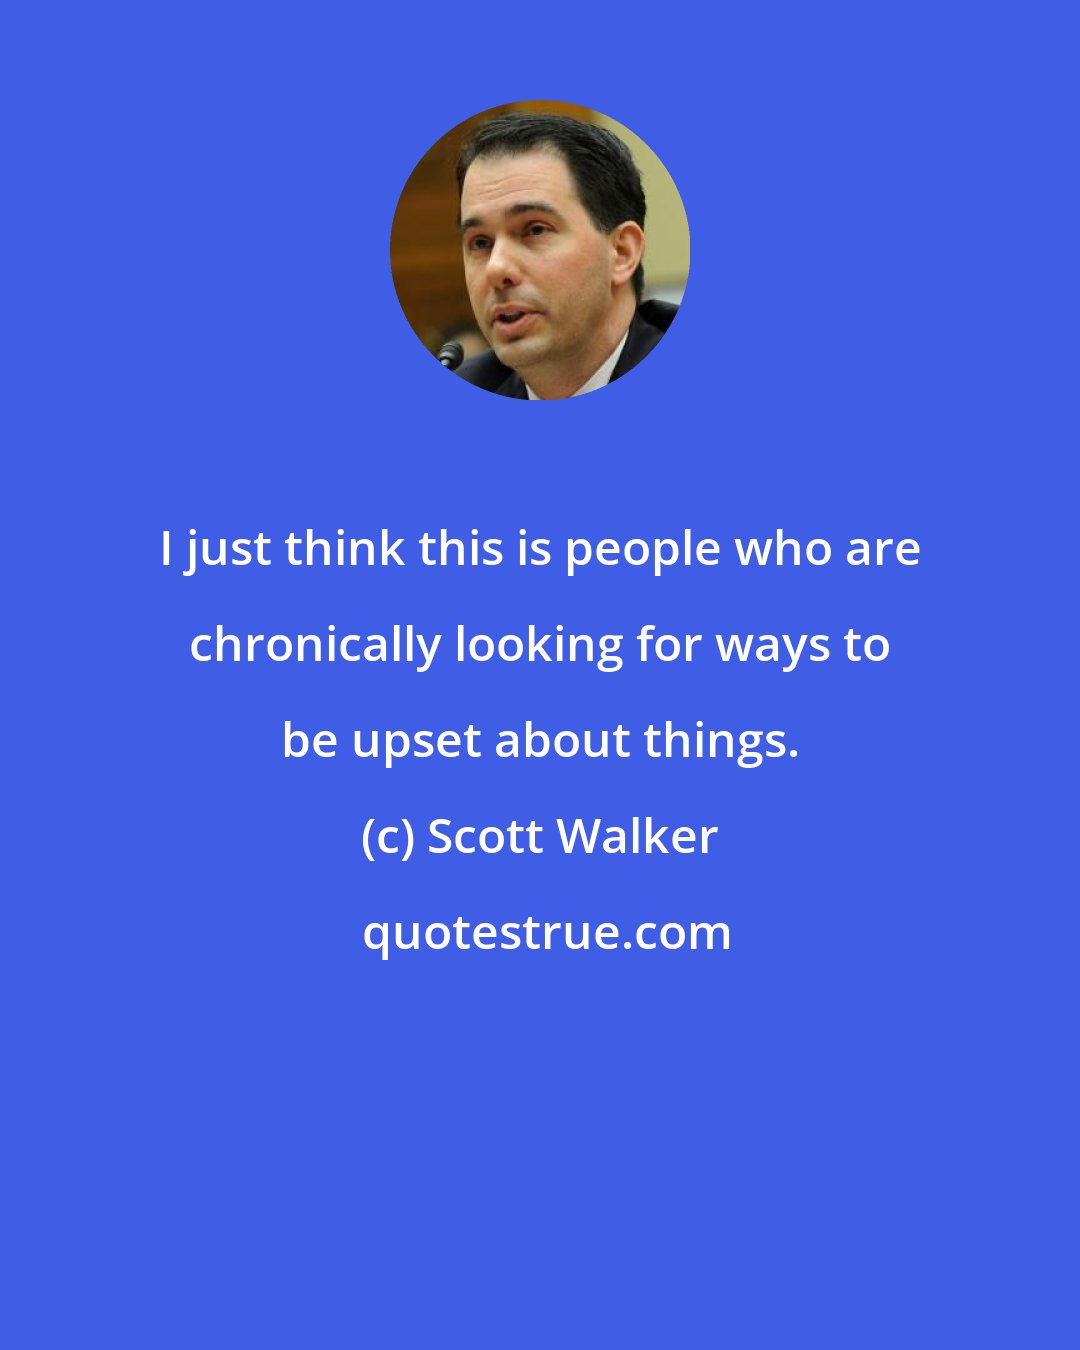 Scott Walker: I just think this is people who are chronically looking for ways to be upset about things.